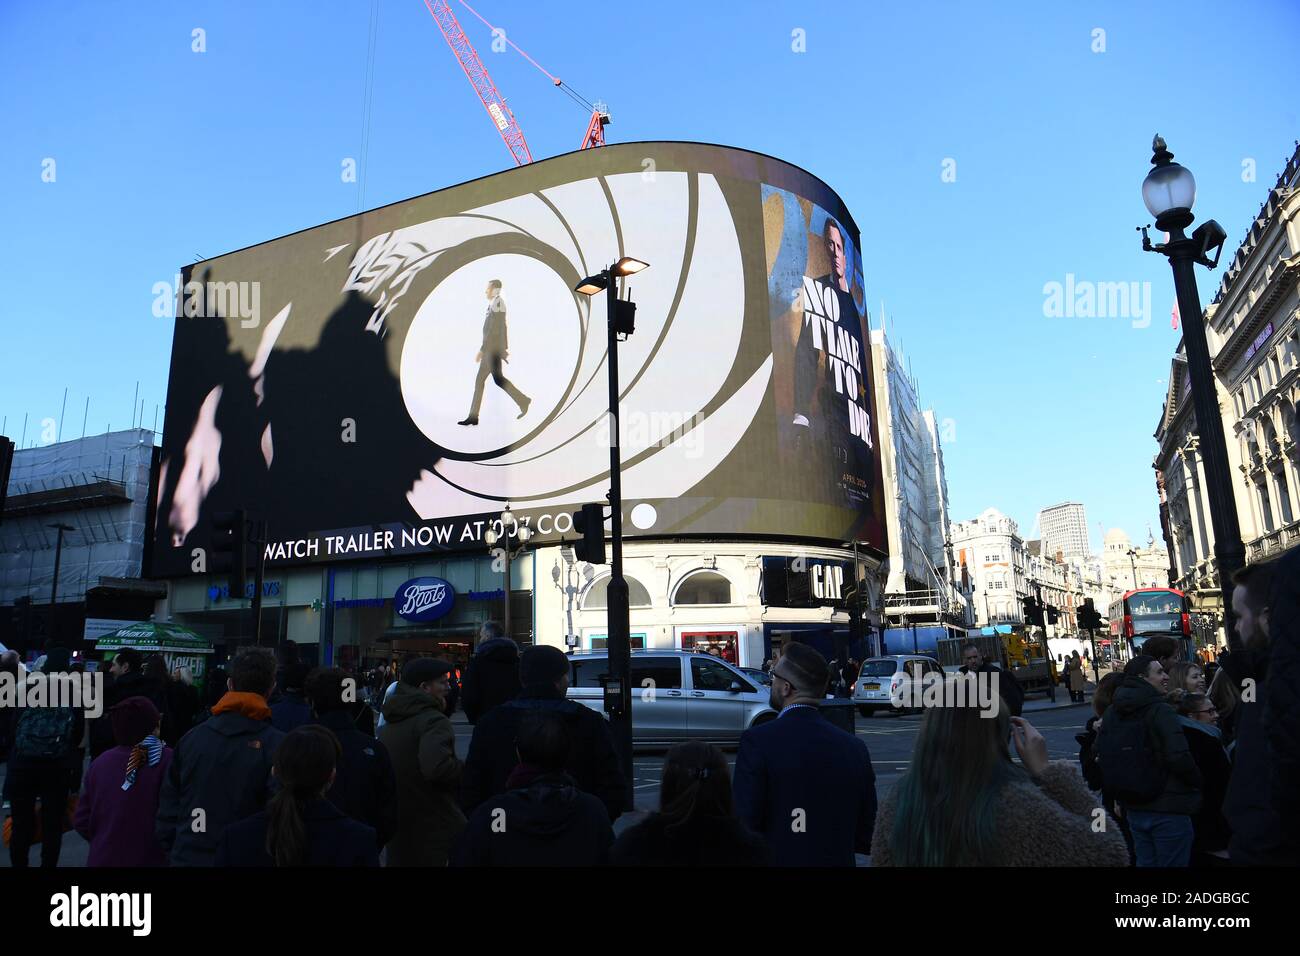 The trailer for the latest Bond film 'No Time to Die' is aired for the first time on the large screen in London's Piccadilly Circus. Stock Photo